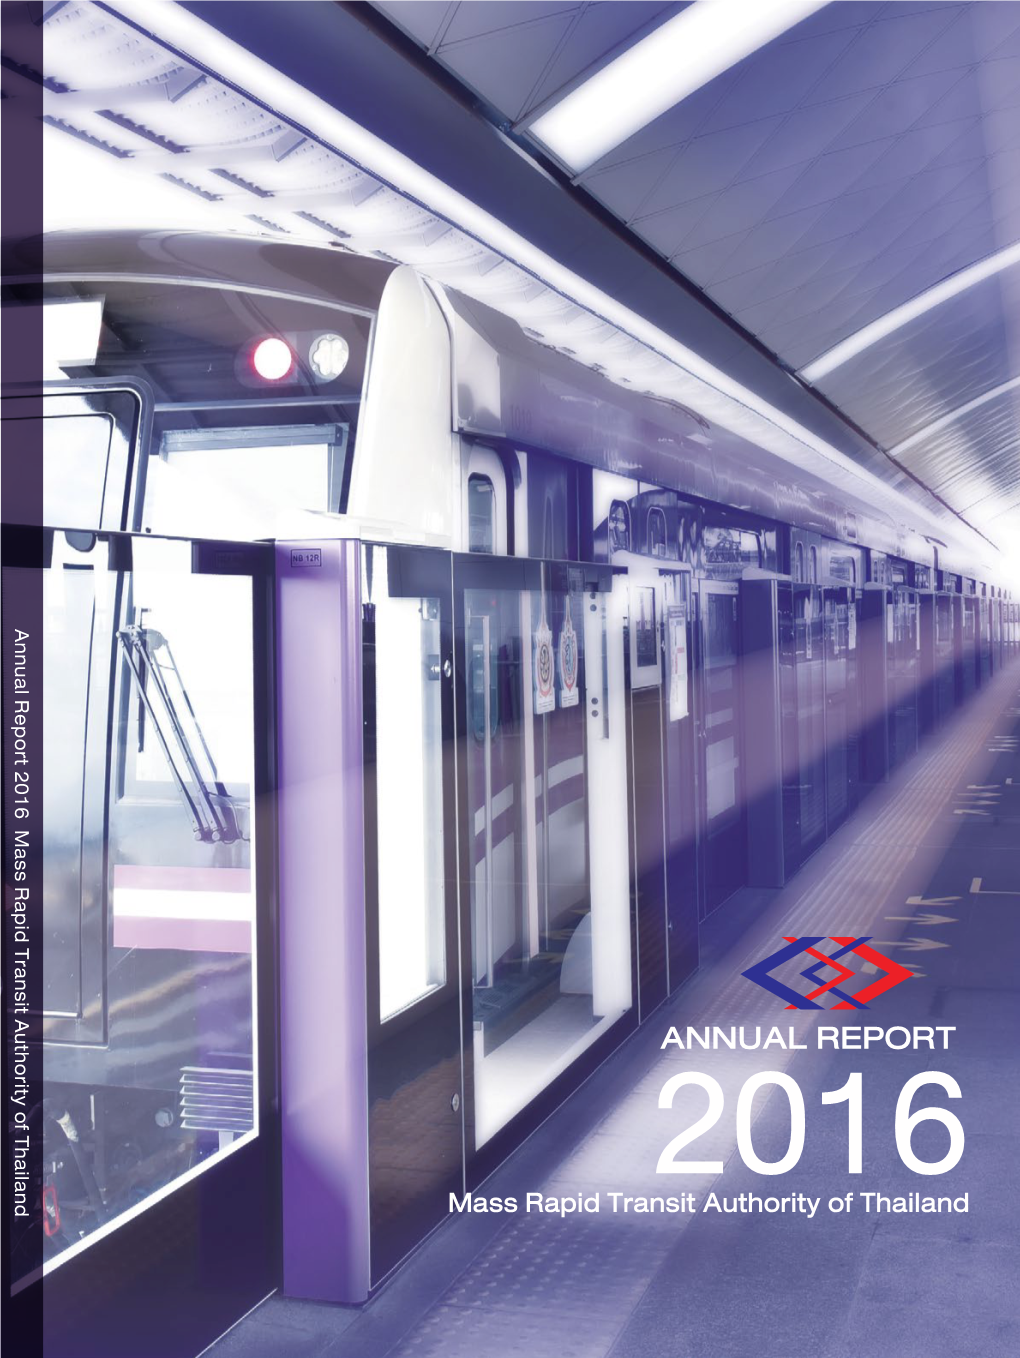 ANNUAL REPORT 2016 Mass Rapid Transit Authority of Thailand